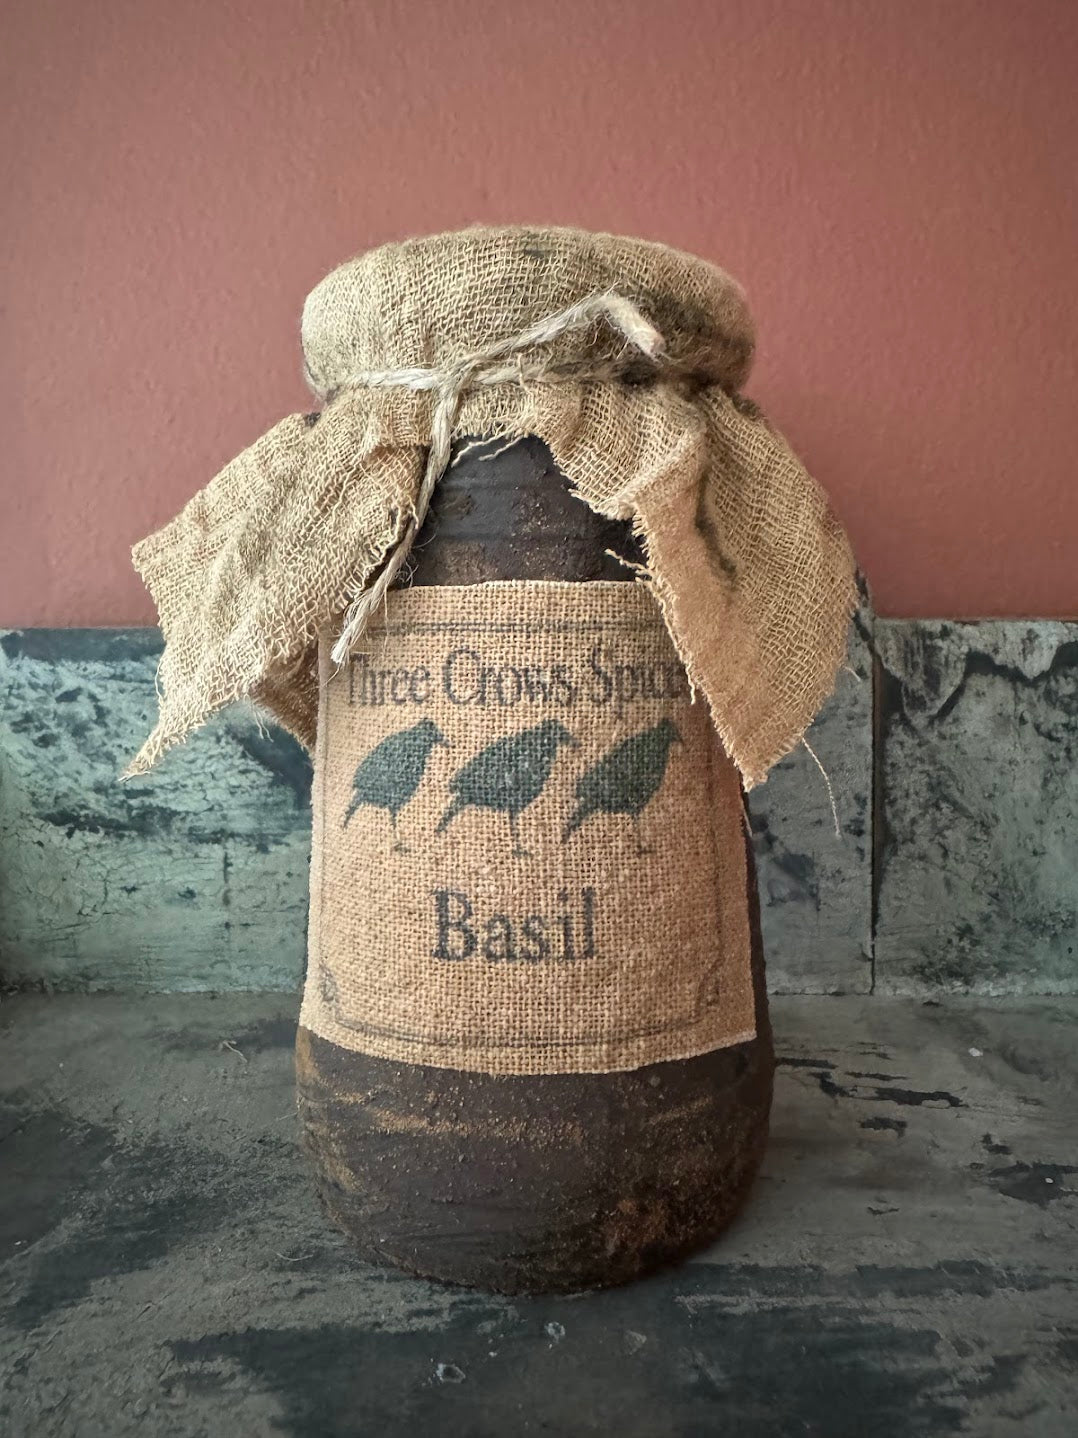 Primitive Colonial Handcrafted Crow Basil Jar